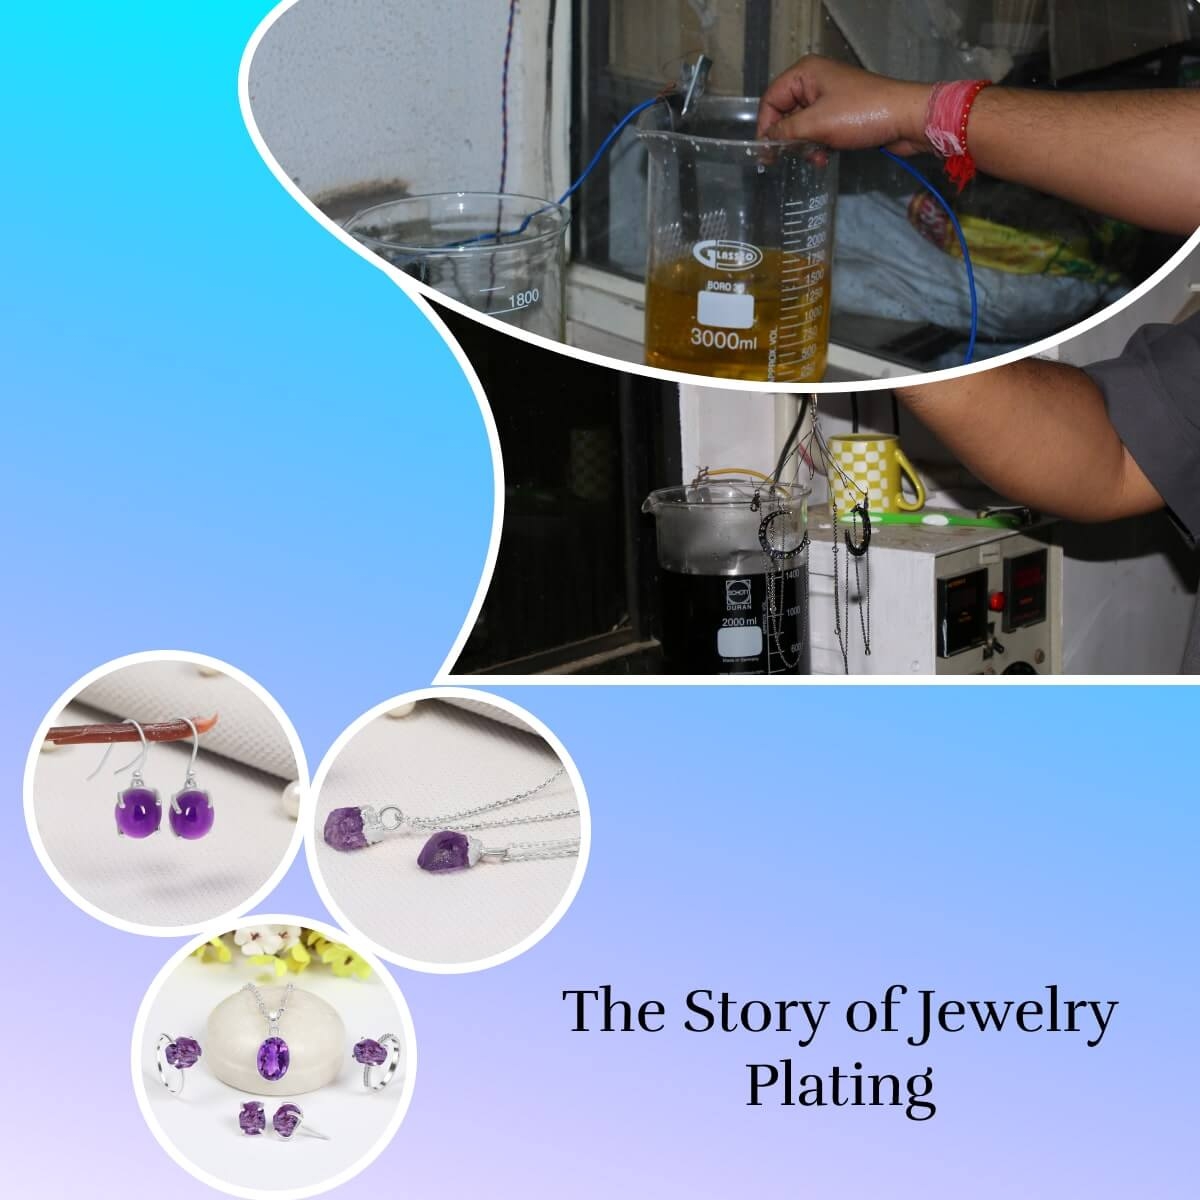 Historical Significance of Plating in Jewelry